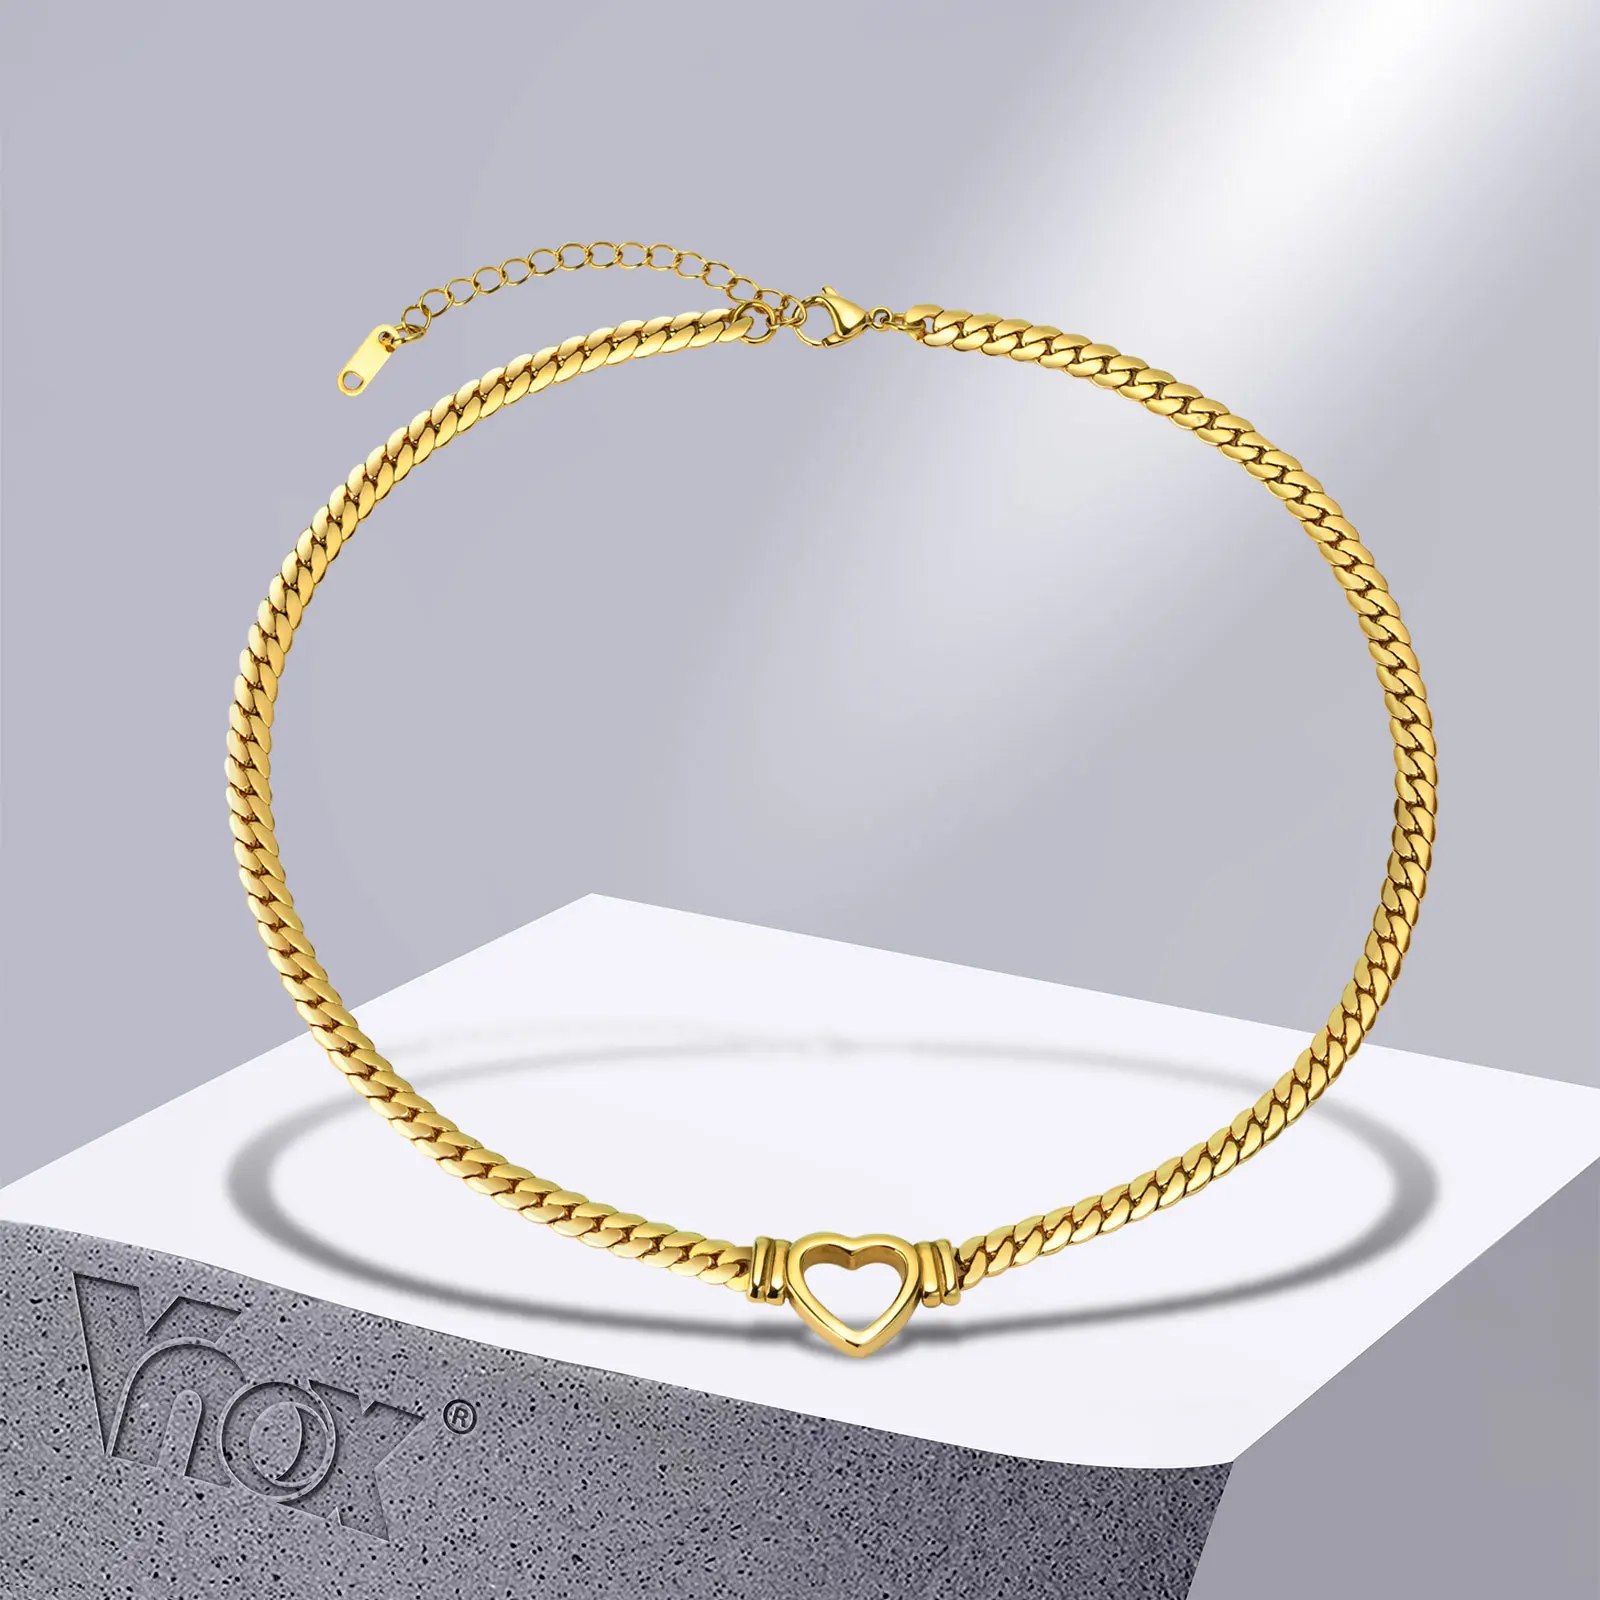 

Vnox Simple Heart Choker Necklaces for Women Jewelry, Gold Color Stainless Steel Curb Chain Collar Gifts to Her